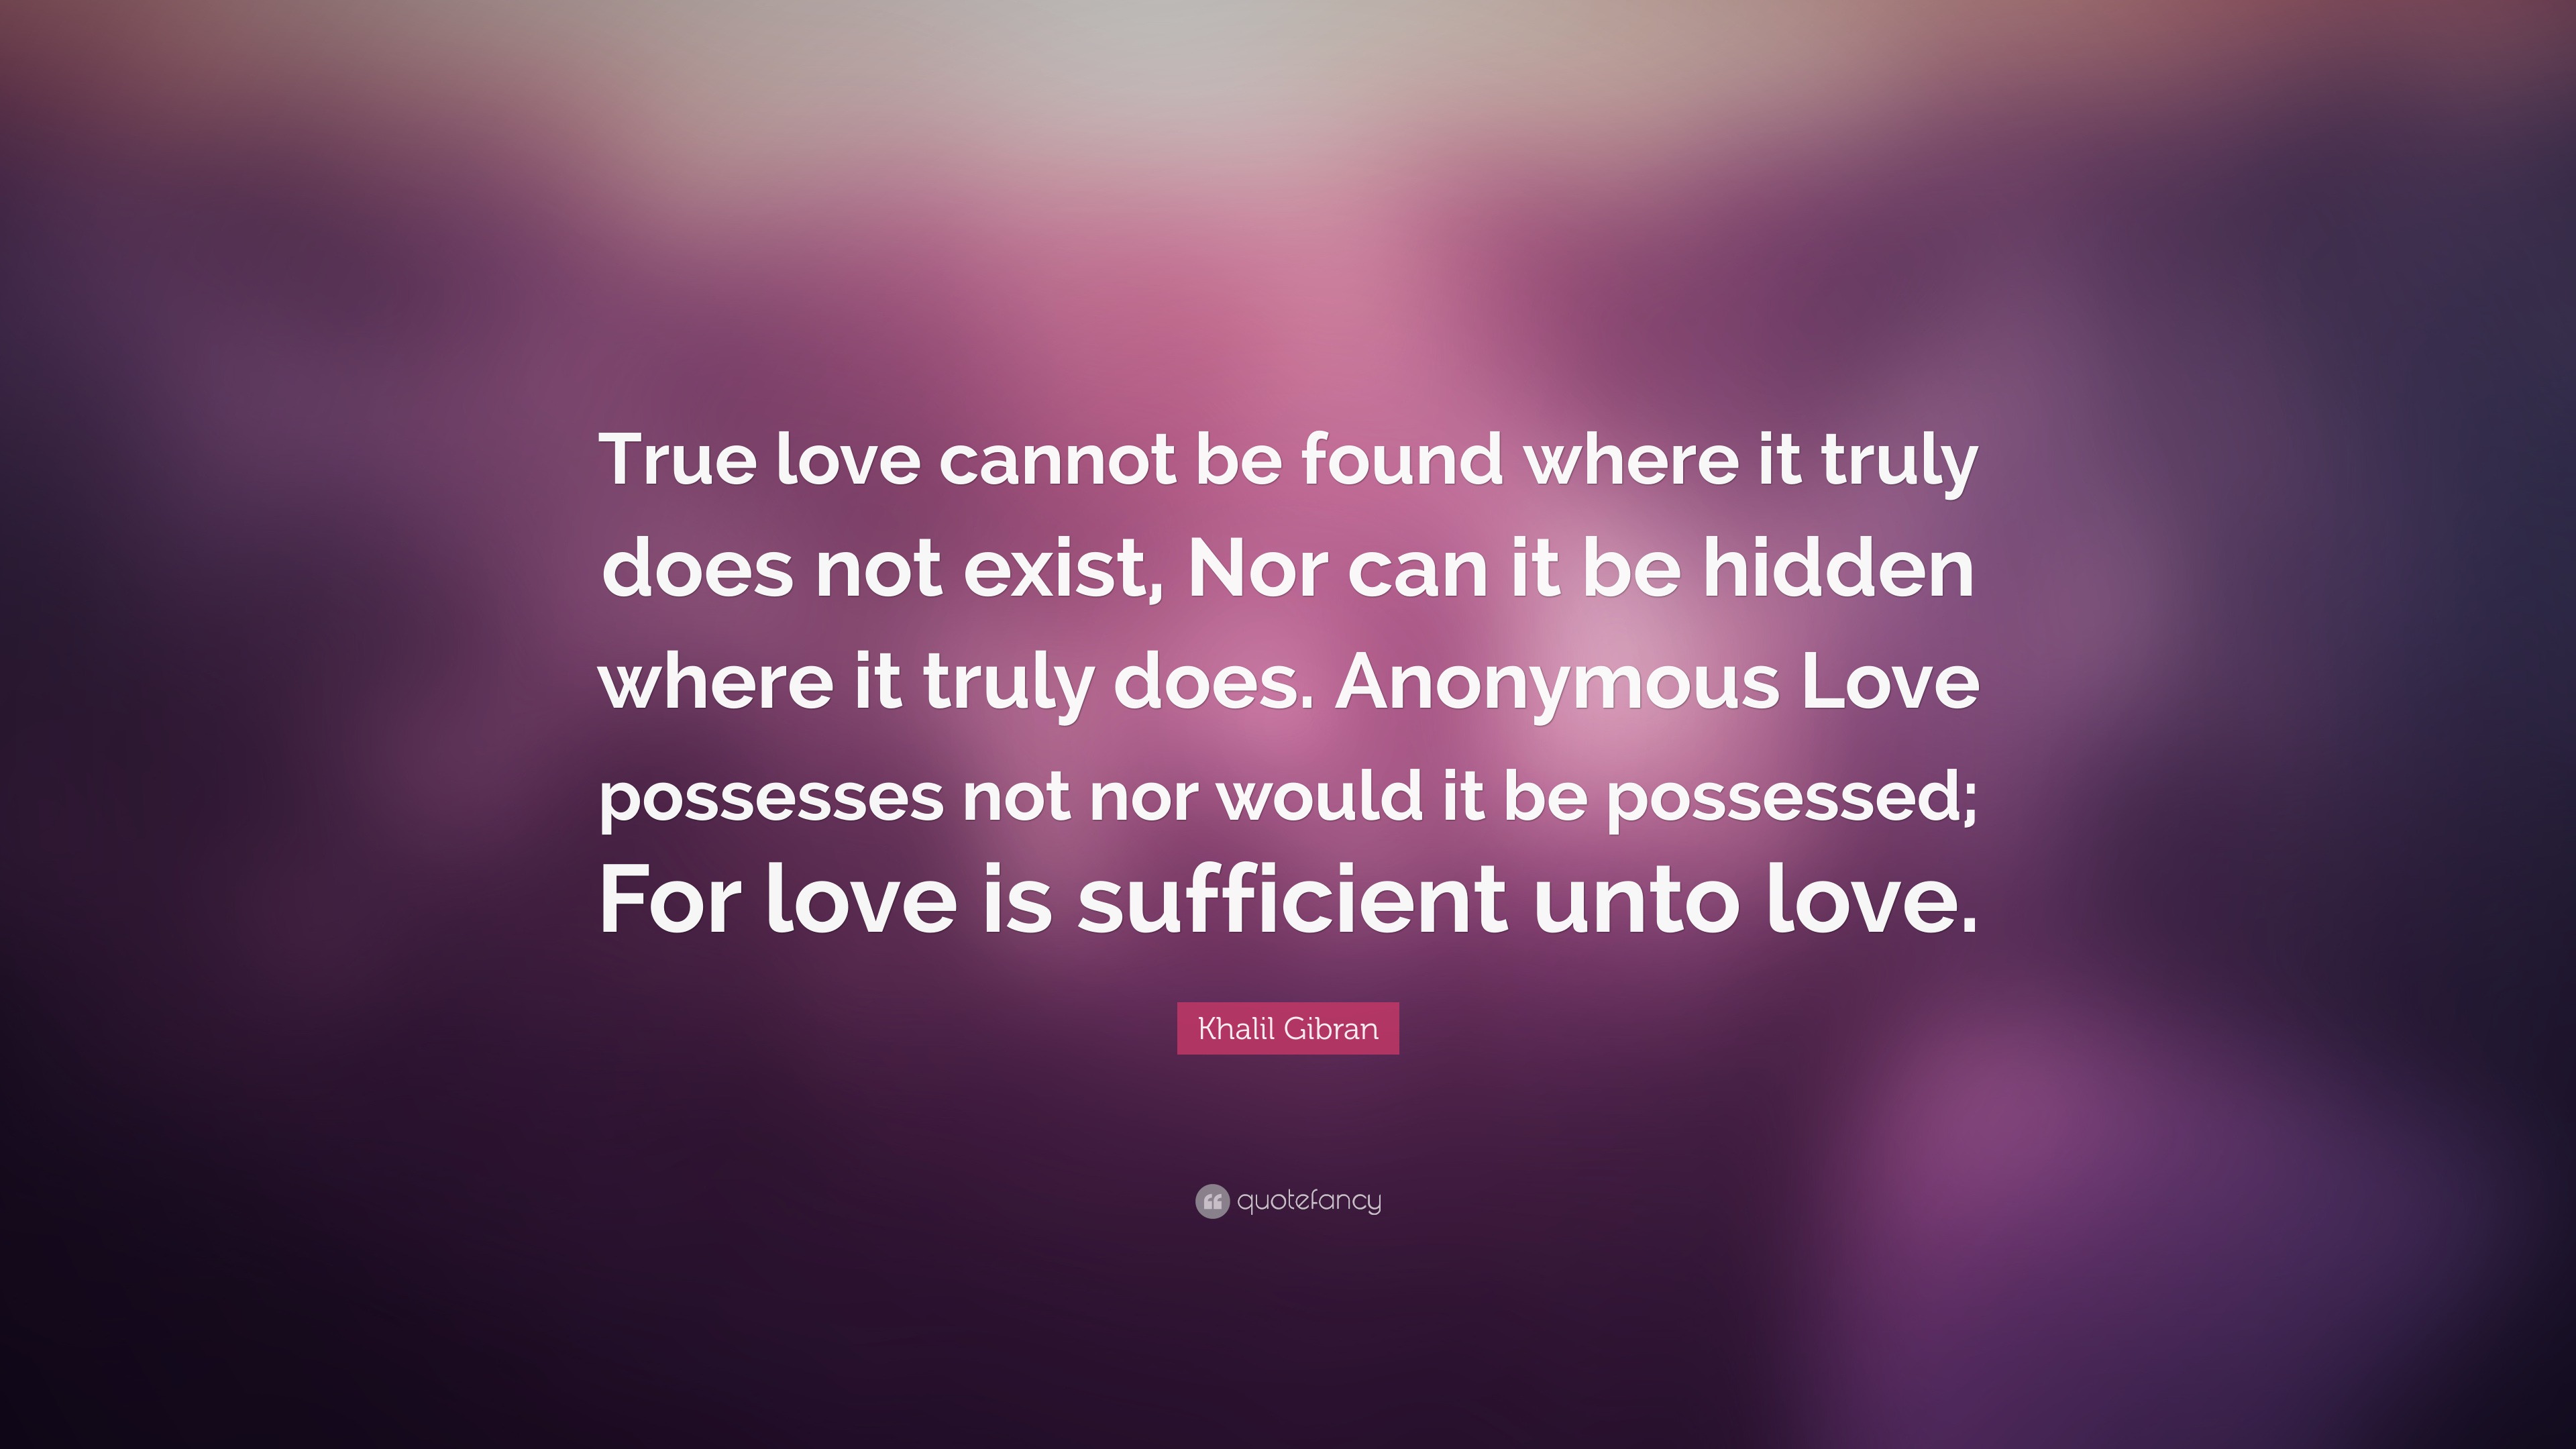 Khalil Gibran Quote: “True love cannot be found where it truly does not  exist, Nor can it be hidden where it truly does. Anonymous Love posses”